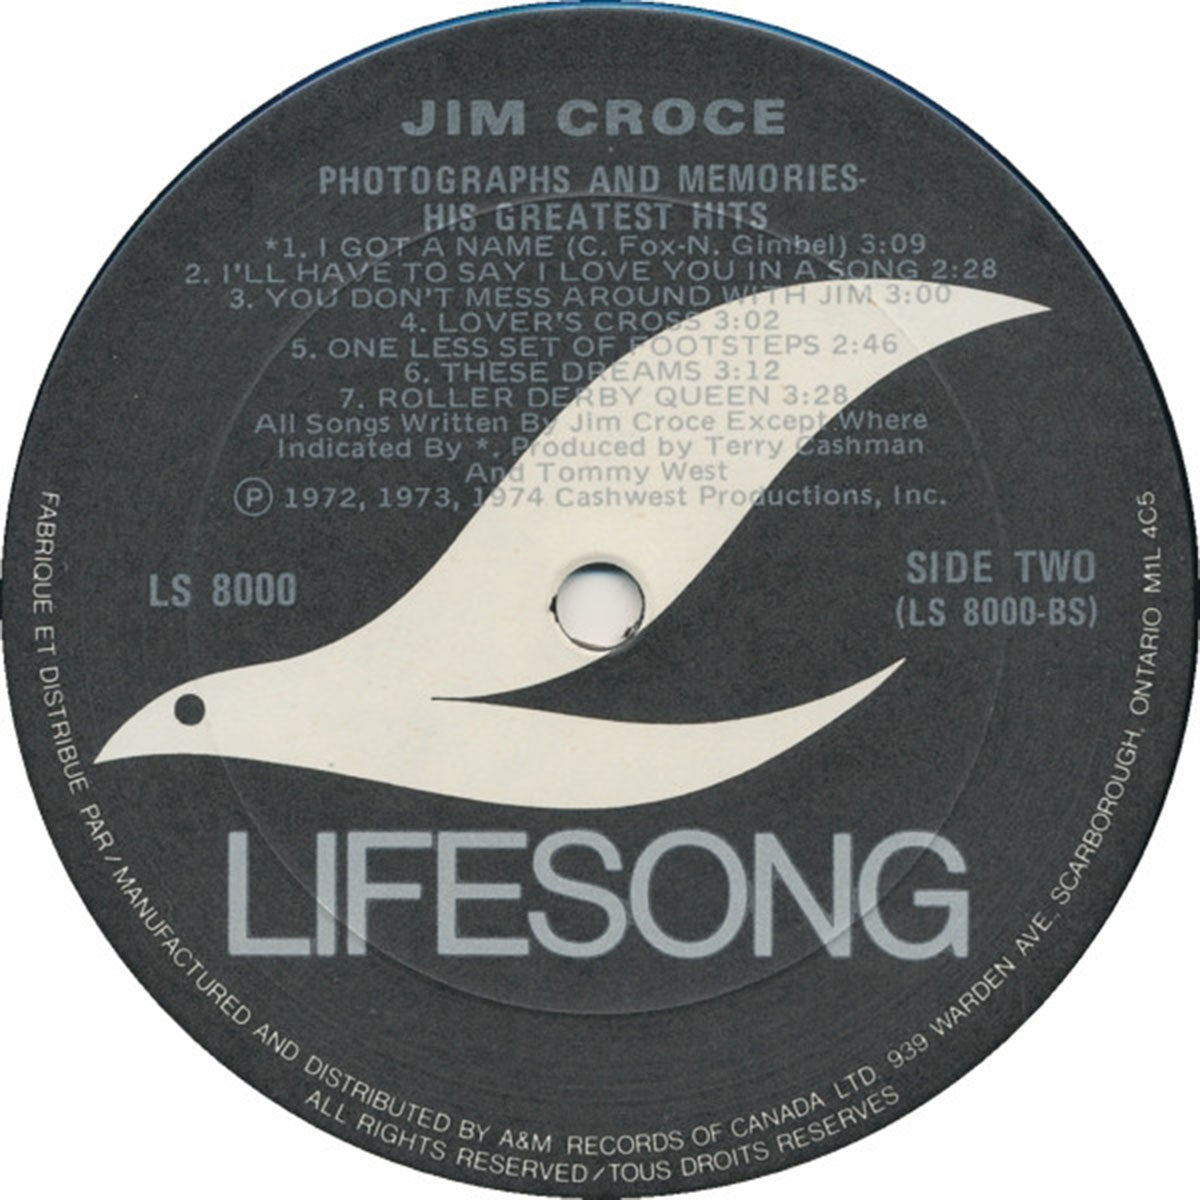 Jim Croce – Photographs And Memories His Greatest Hits